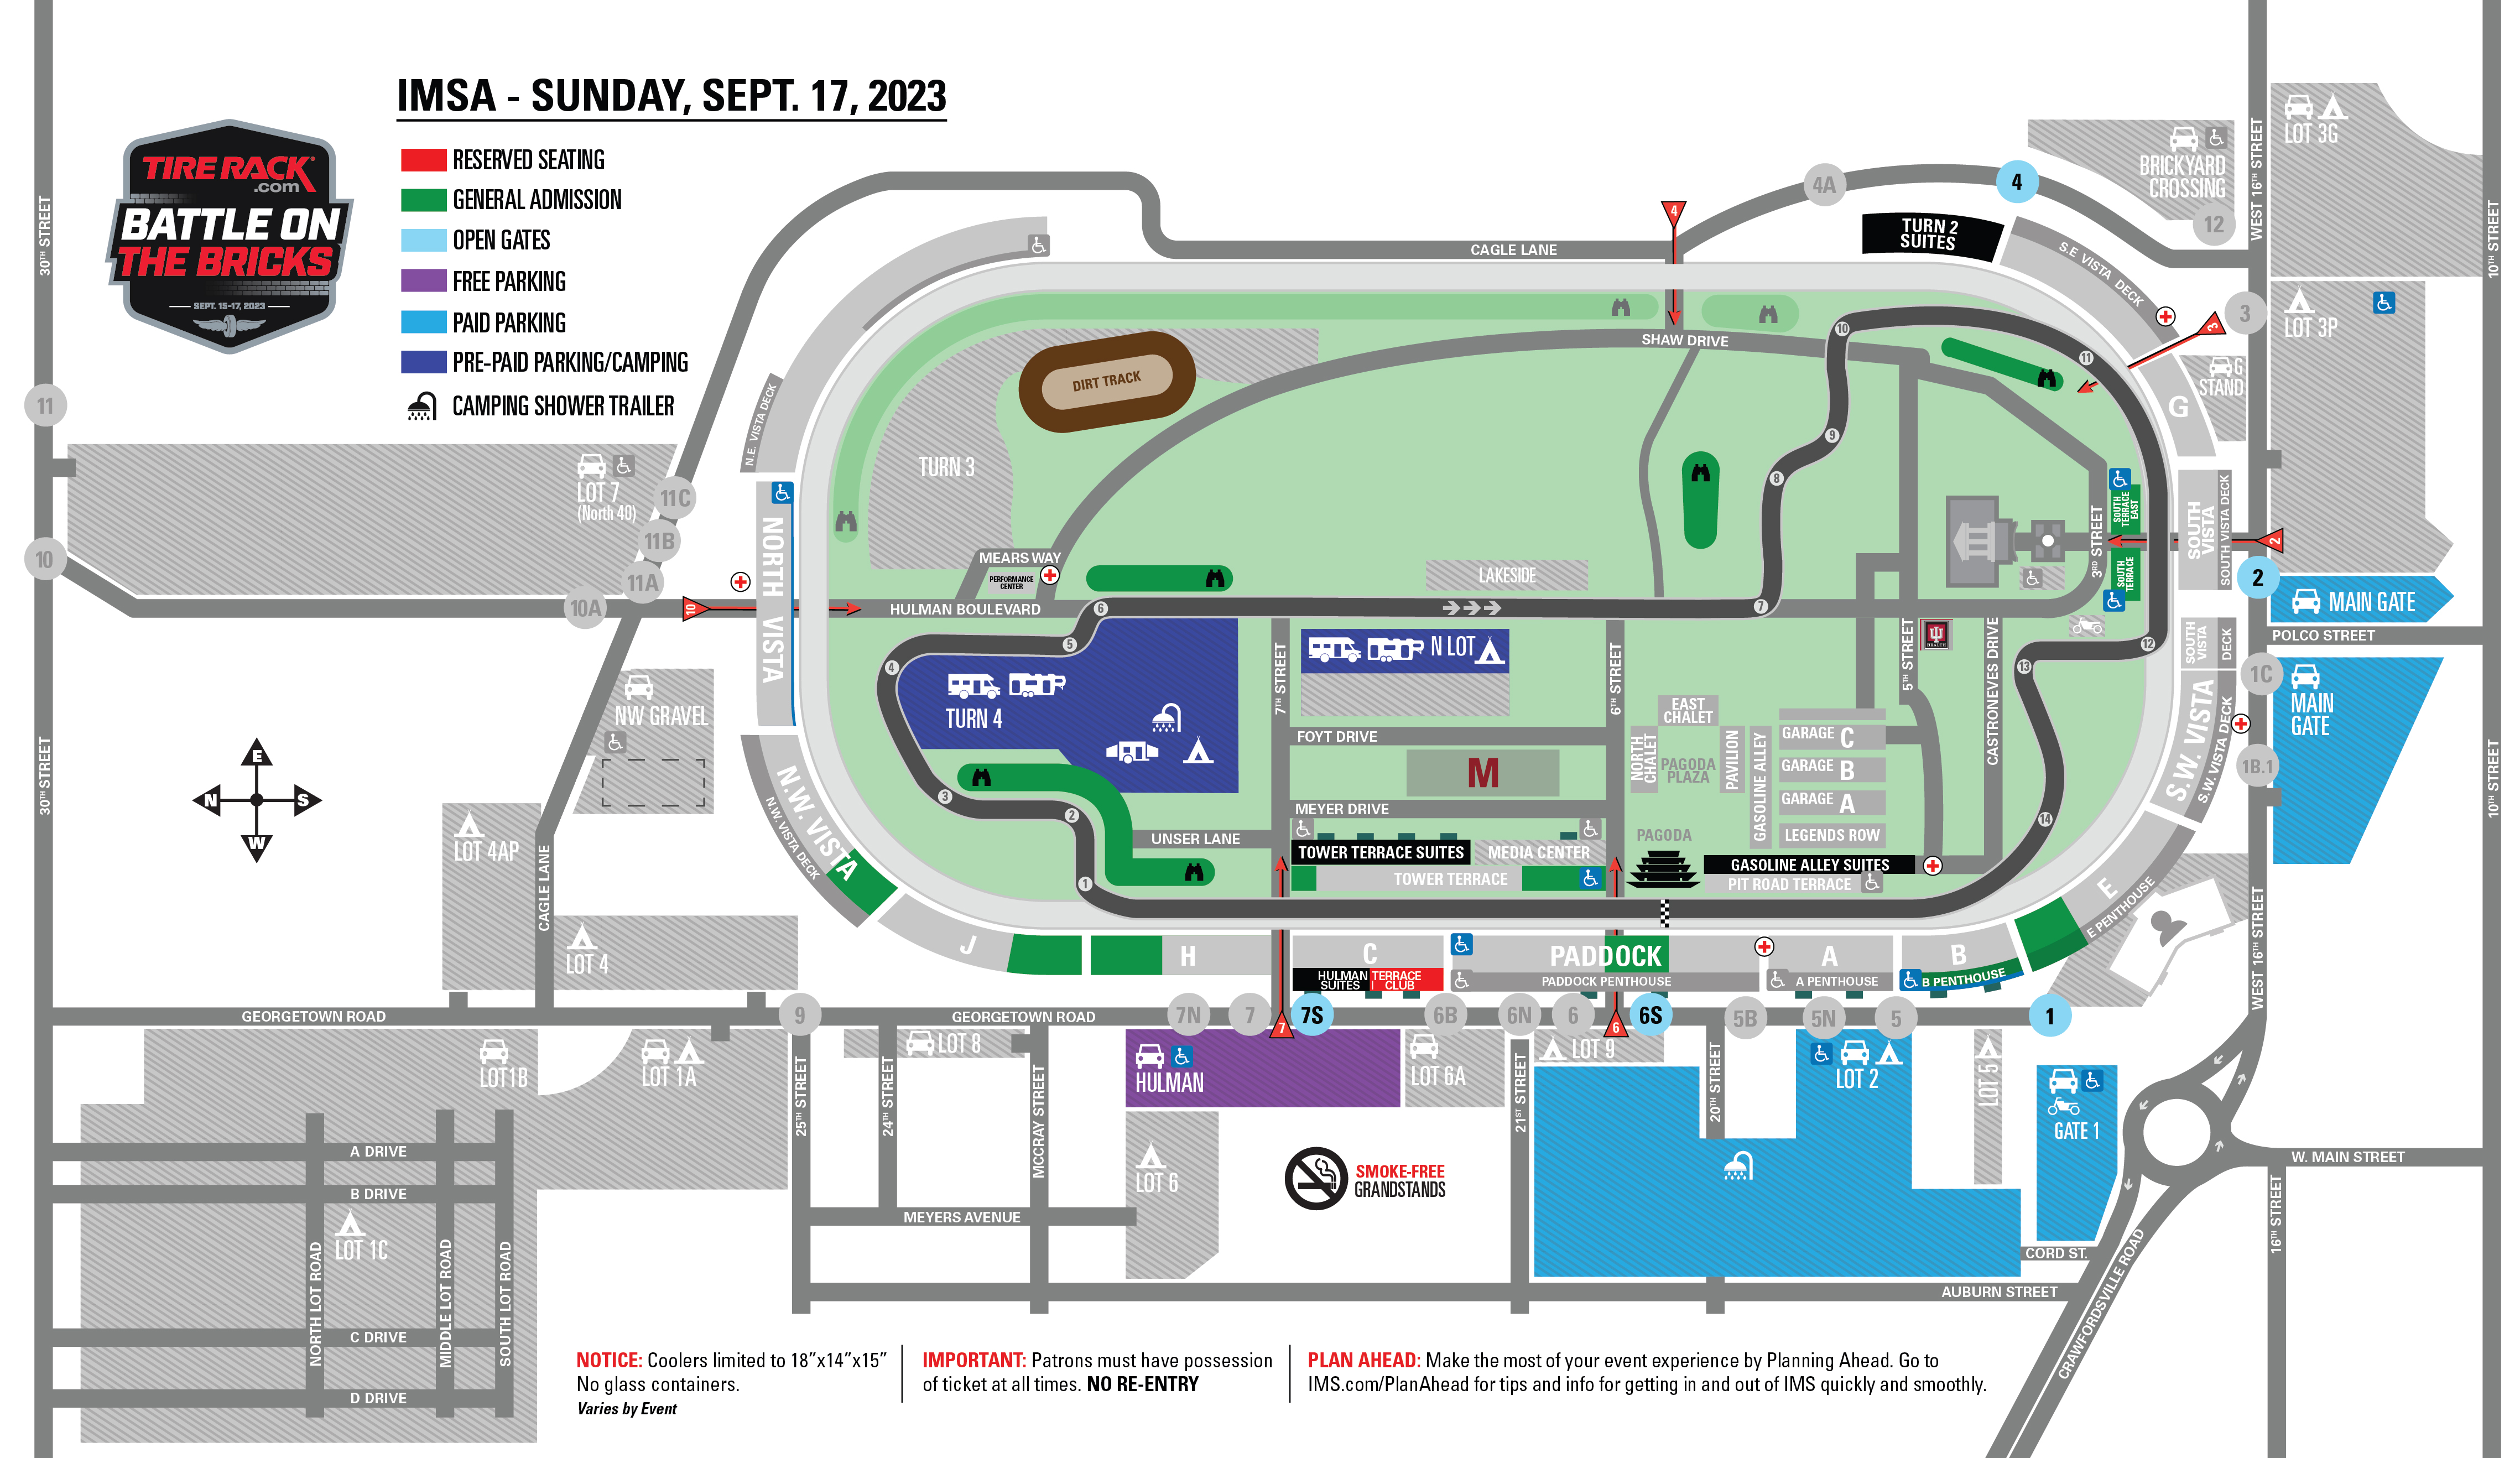 Indy 500 Race Day Parking Map